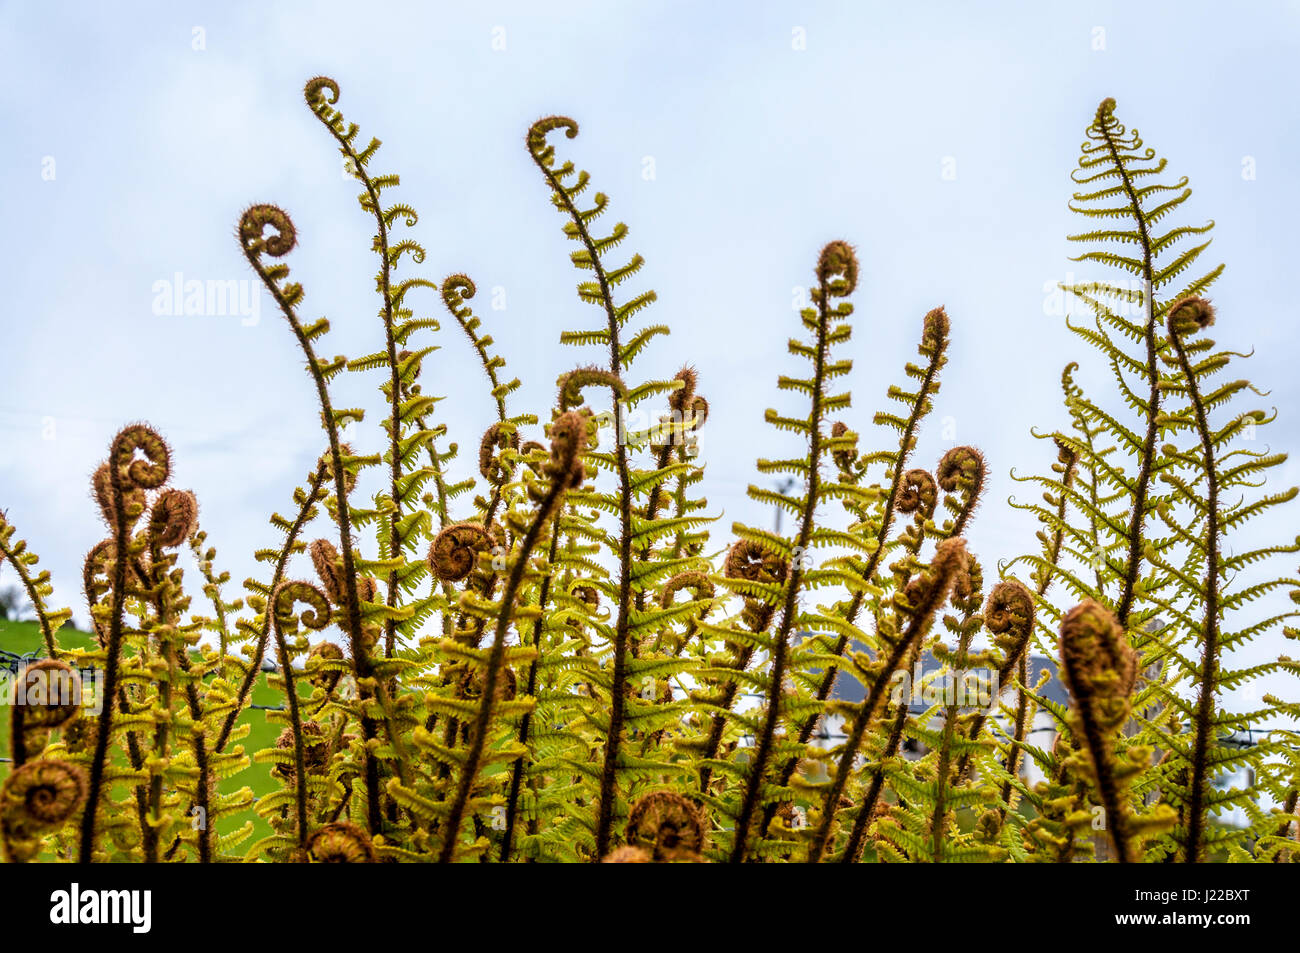 Fern unrolling a new frond. New growth in spring. Ferns renewal. Rebirth. Stock Photo